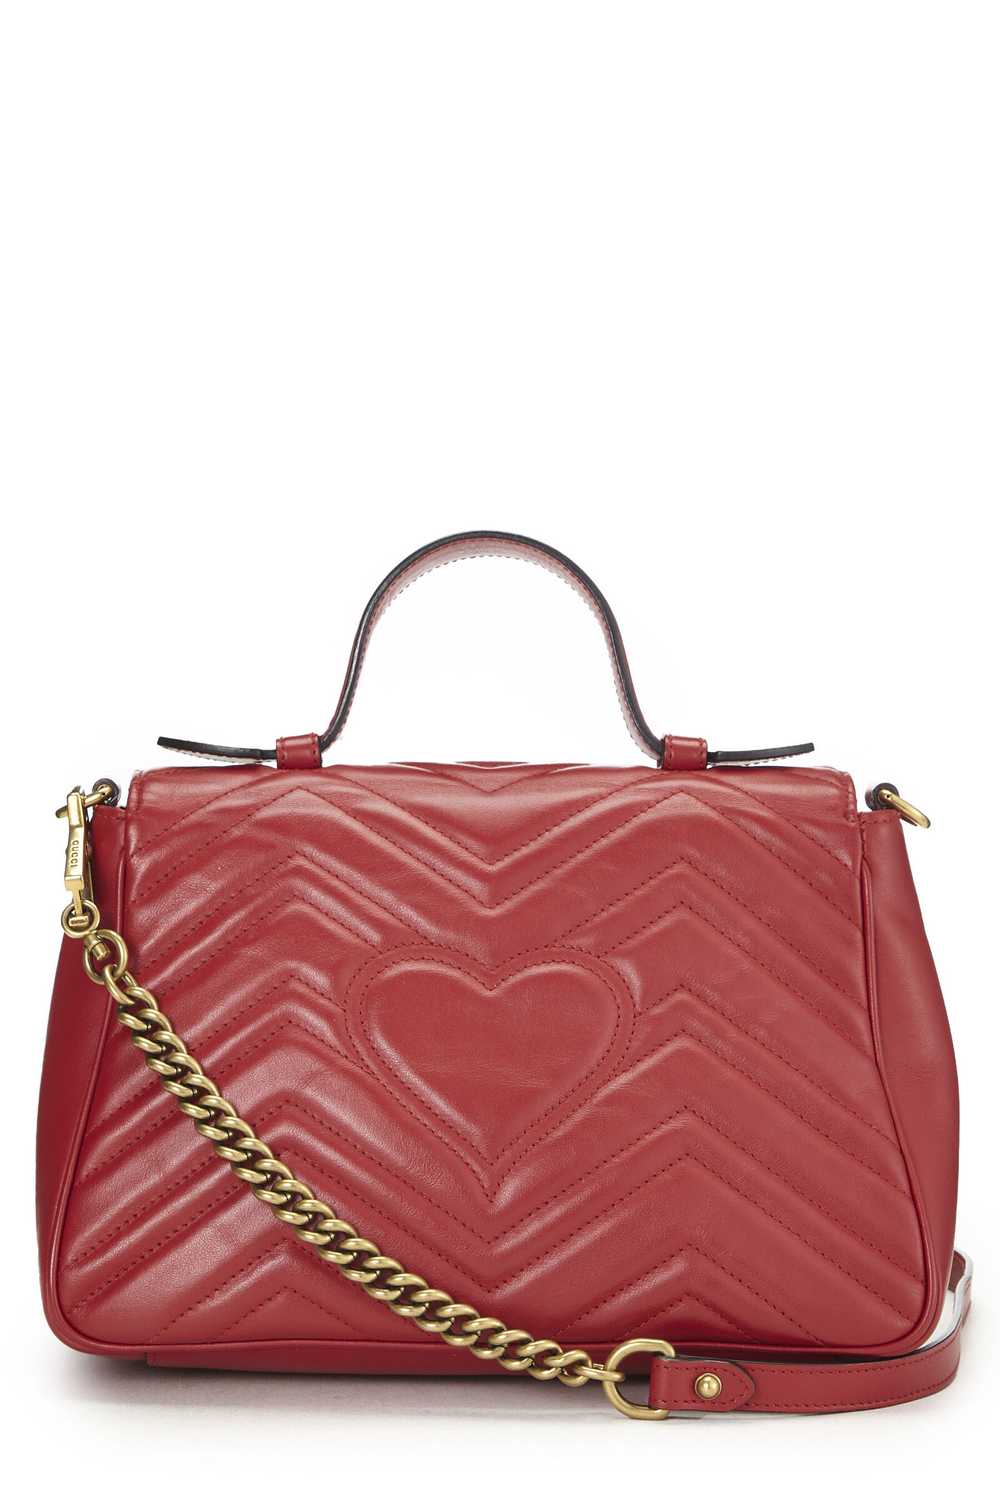 Red Leather GG Marmont Top Handle Bag Small - image 4